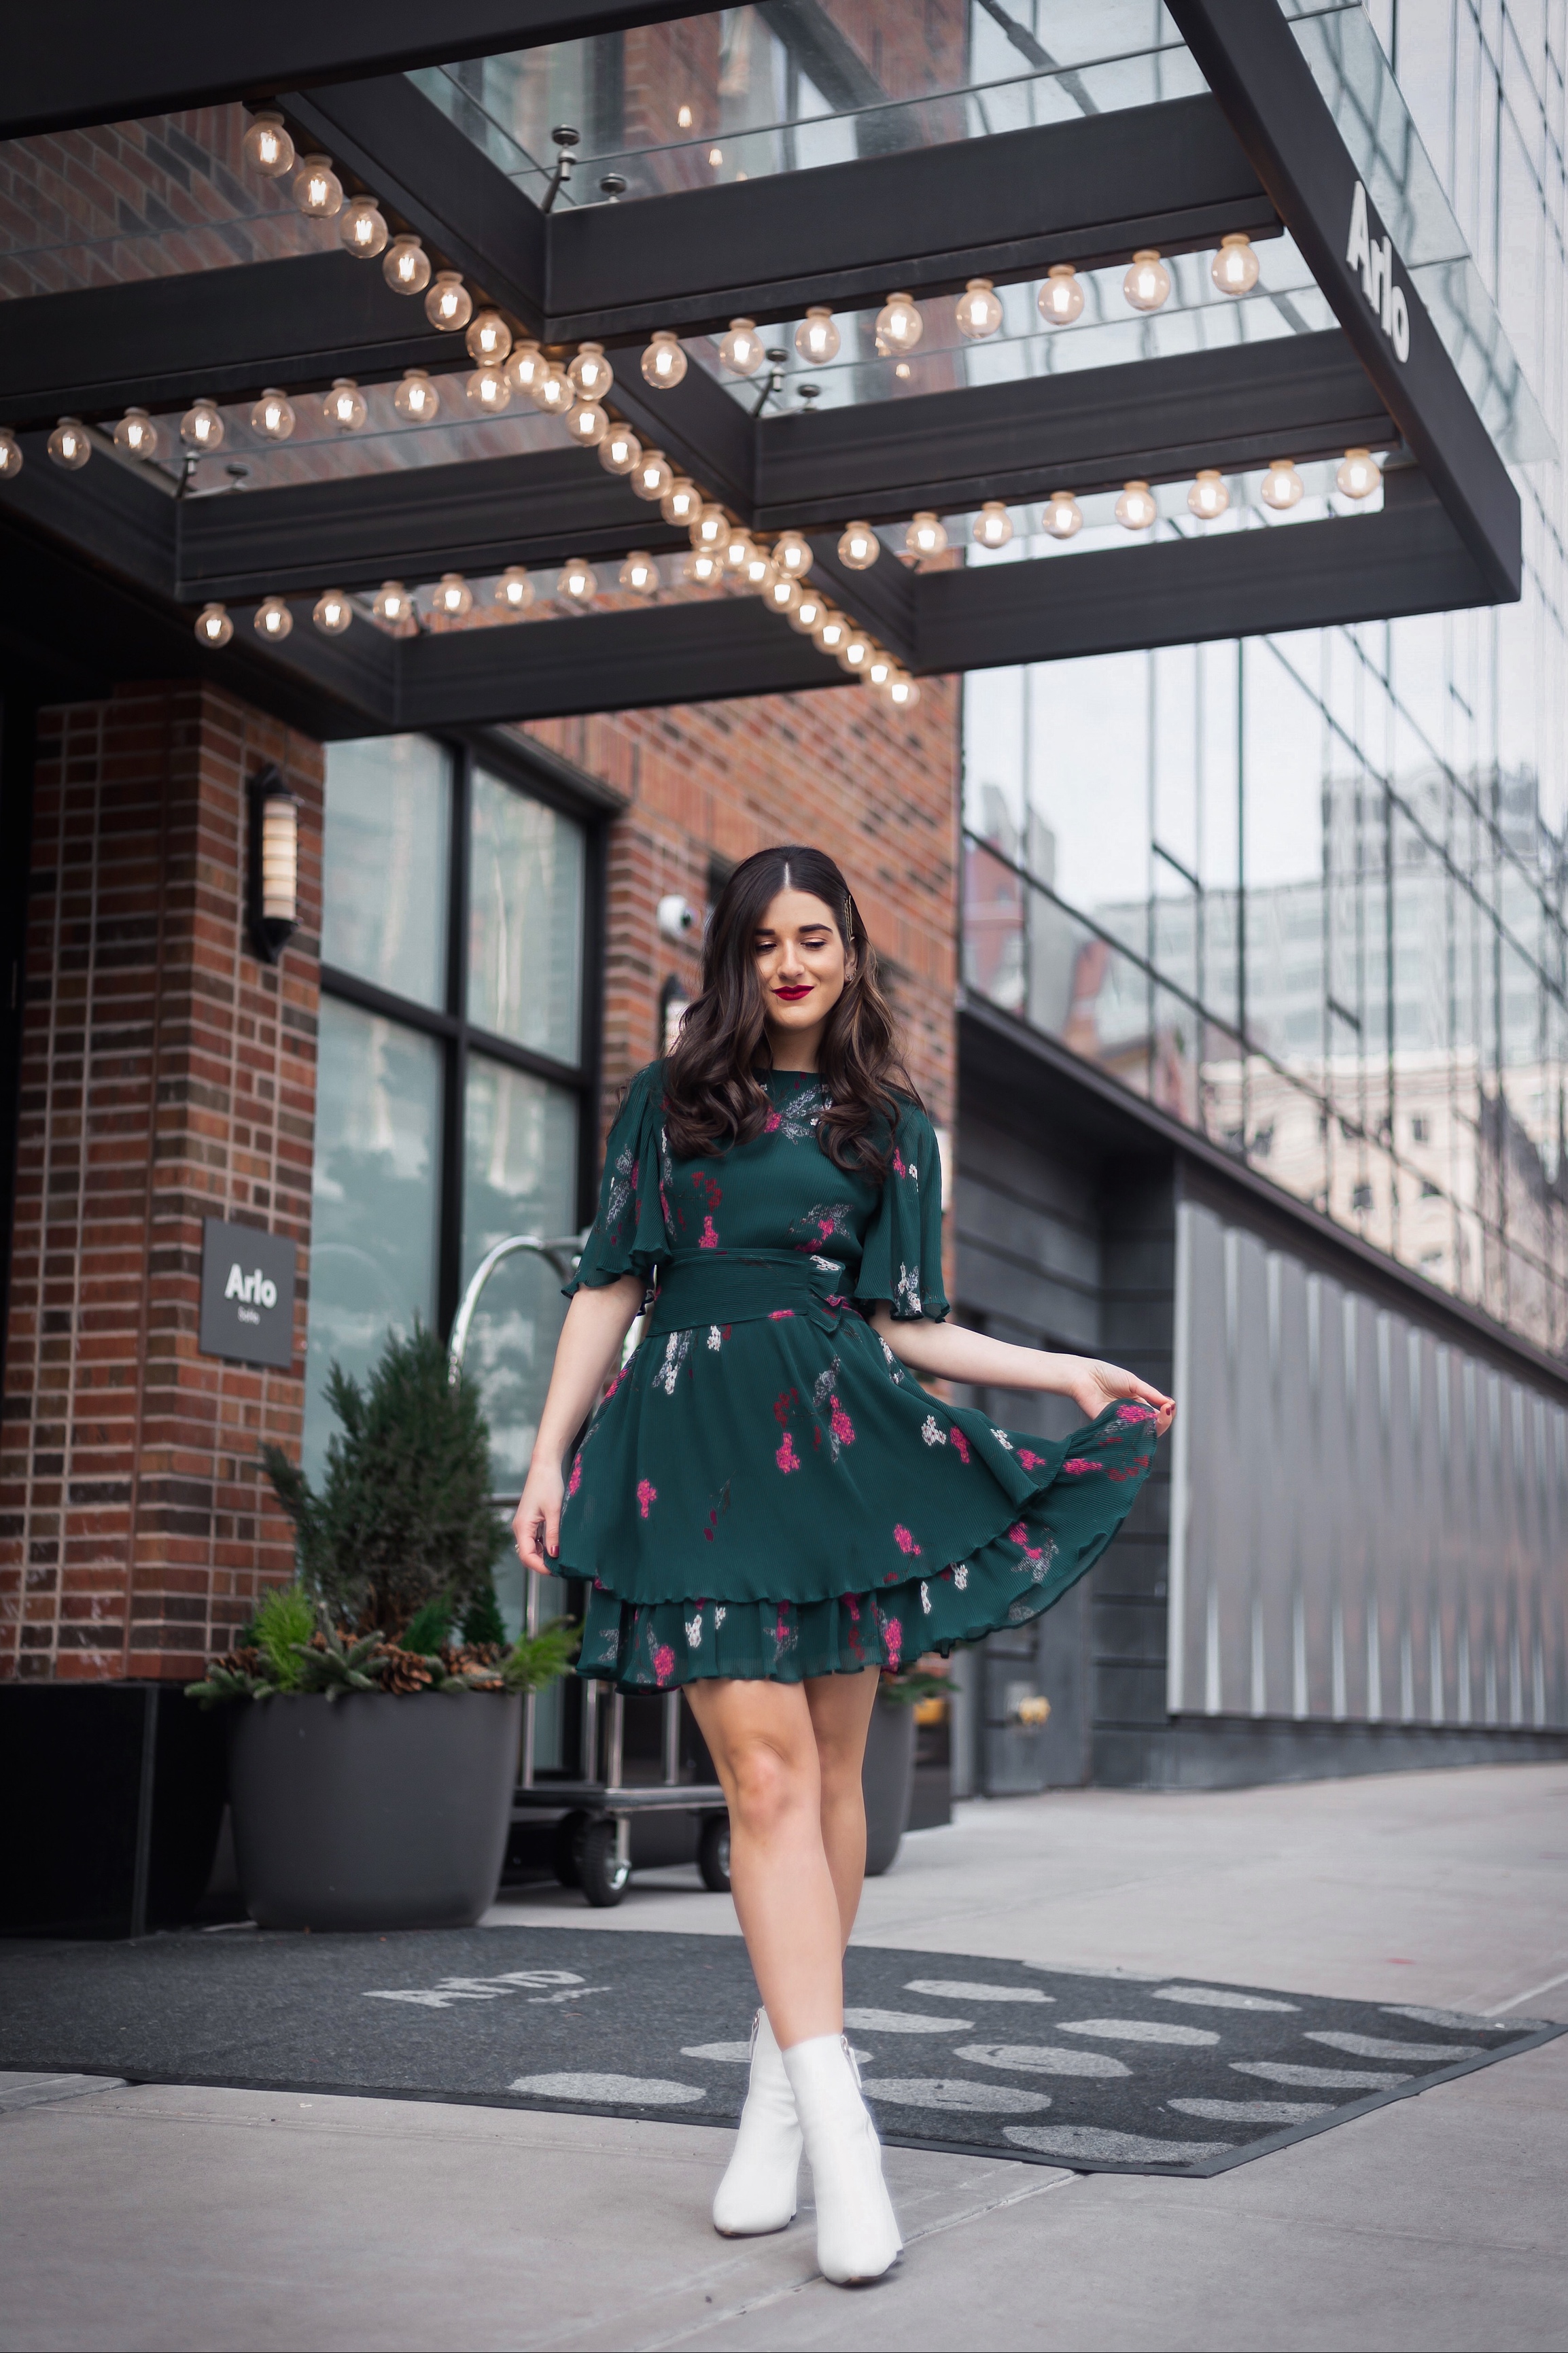 10 NYC Experiences Everyone Should Have Green Floral Dress White Booties Esther Santer Fashion Blog NYC Street Style Blogger Outfit OOTD Trendy Shopping Girl What How To Wear Bobby Pins Hairstyle Fall Look  Butterfly Sleeves Keepsake Label Arlo Soho.JPG